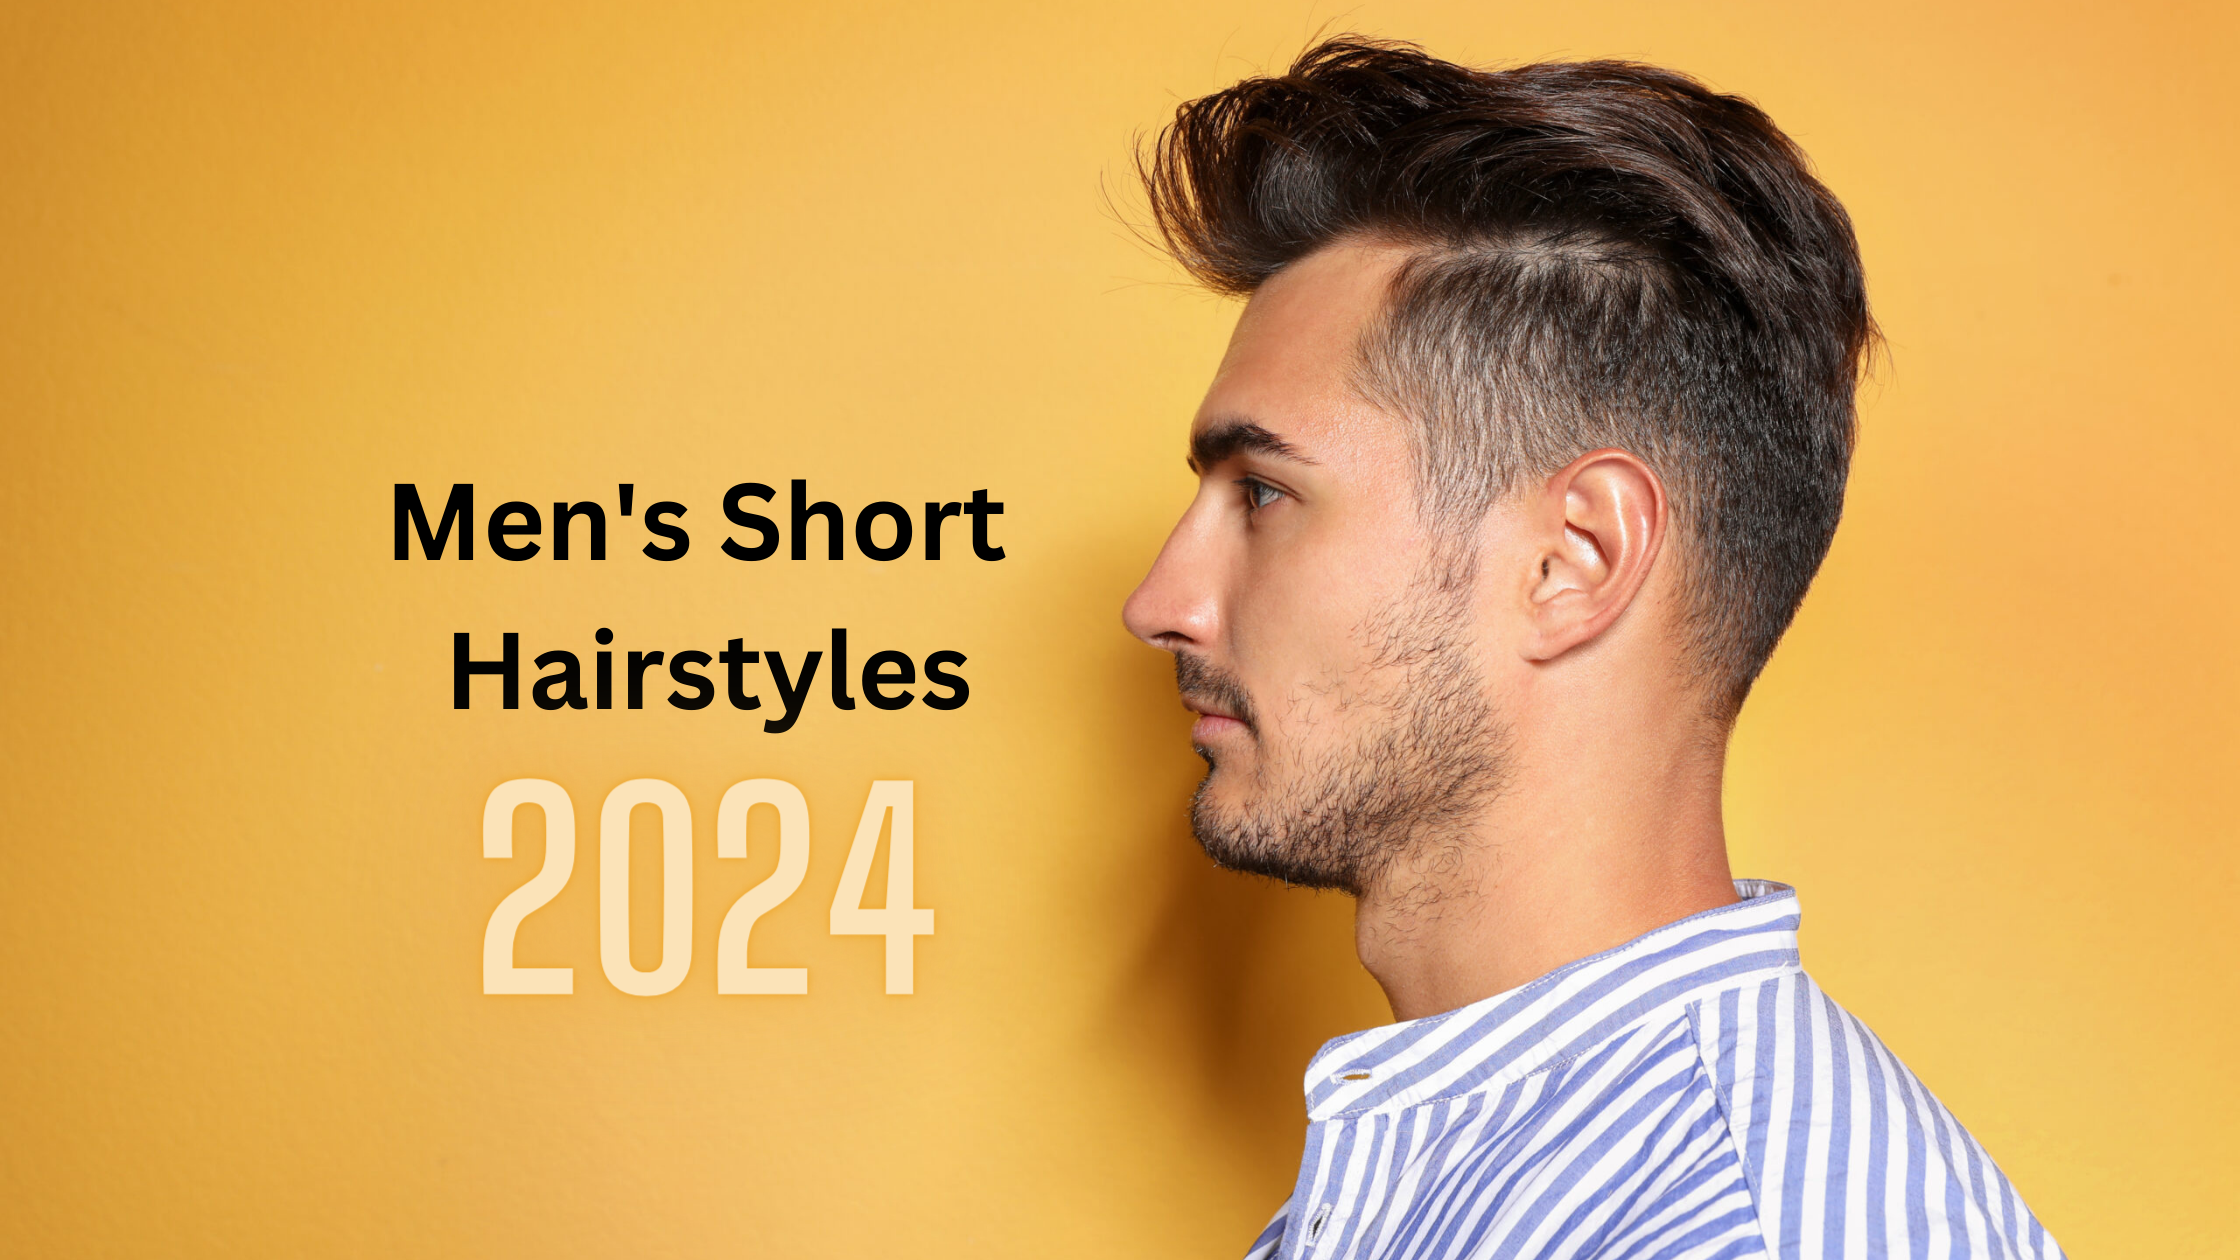 20 Best Short Hairstyles for Men 2022 - Short Haircuts for Thick & Thin Hair